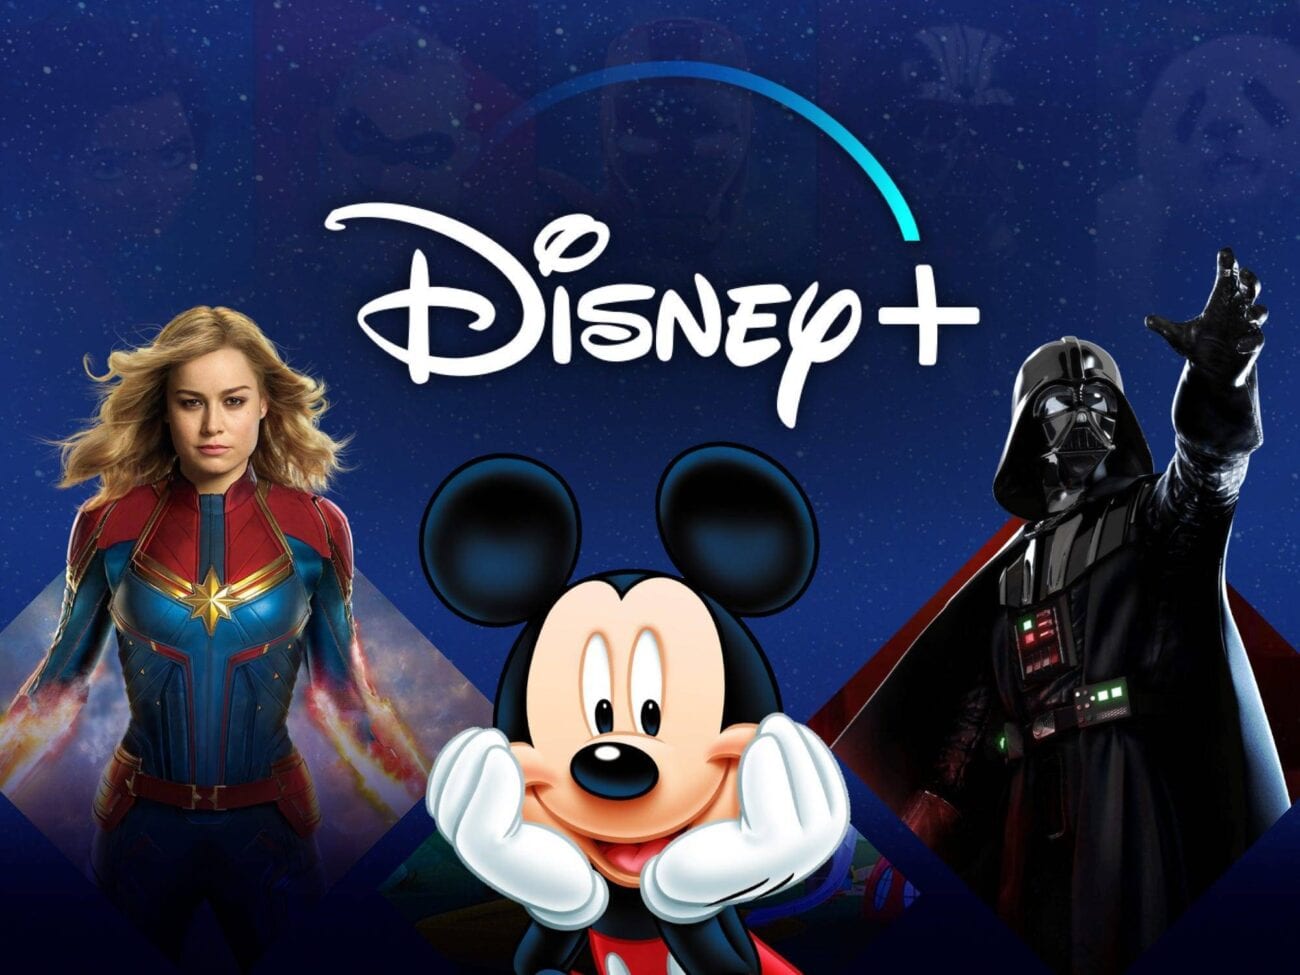 Since its launch, Disney Plus subscriptions have netted the fastest growth for any streaming service. Use our tools to get it for free!